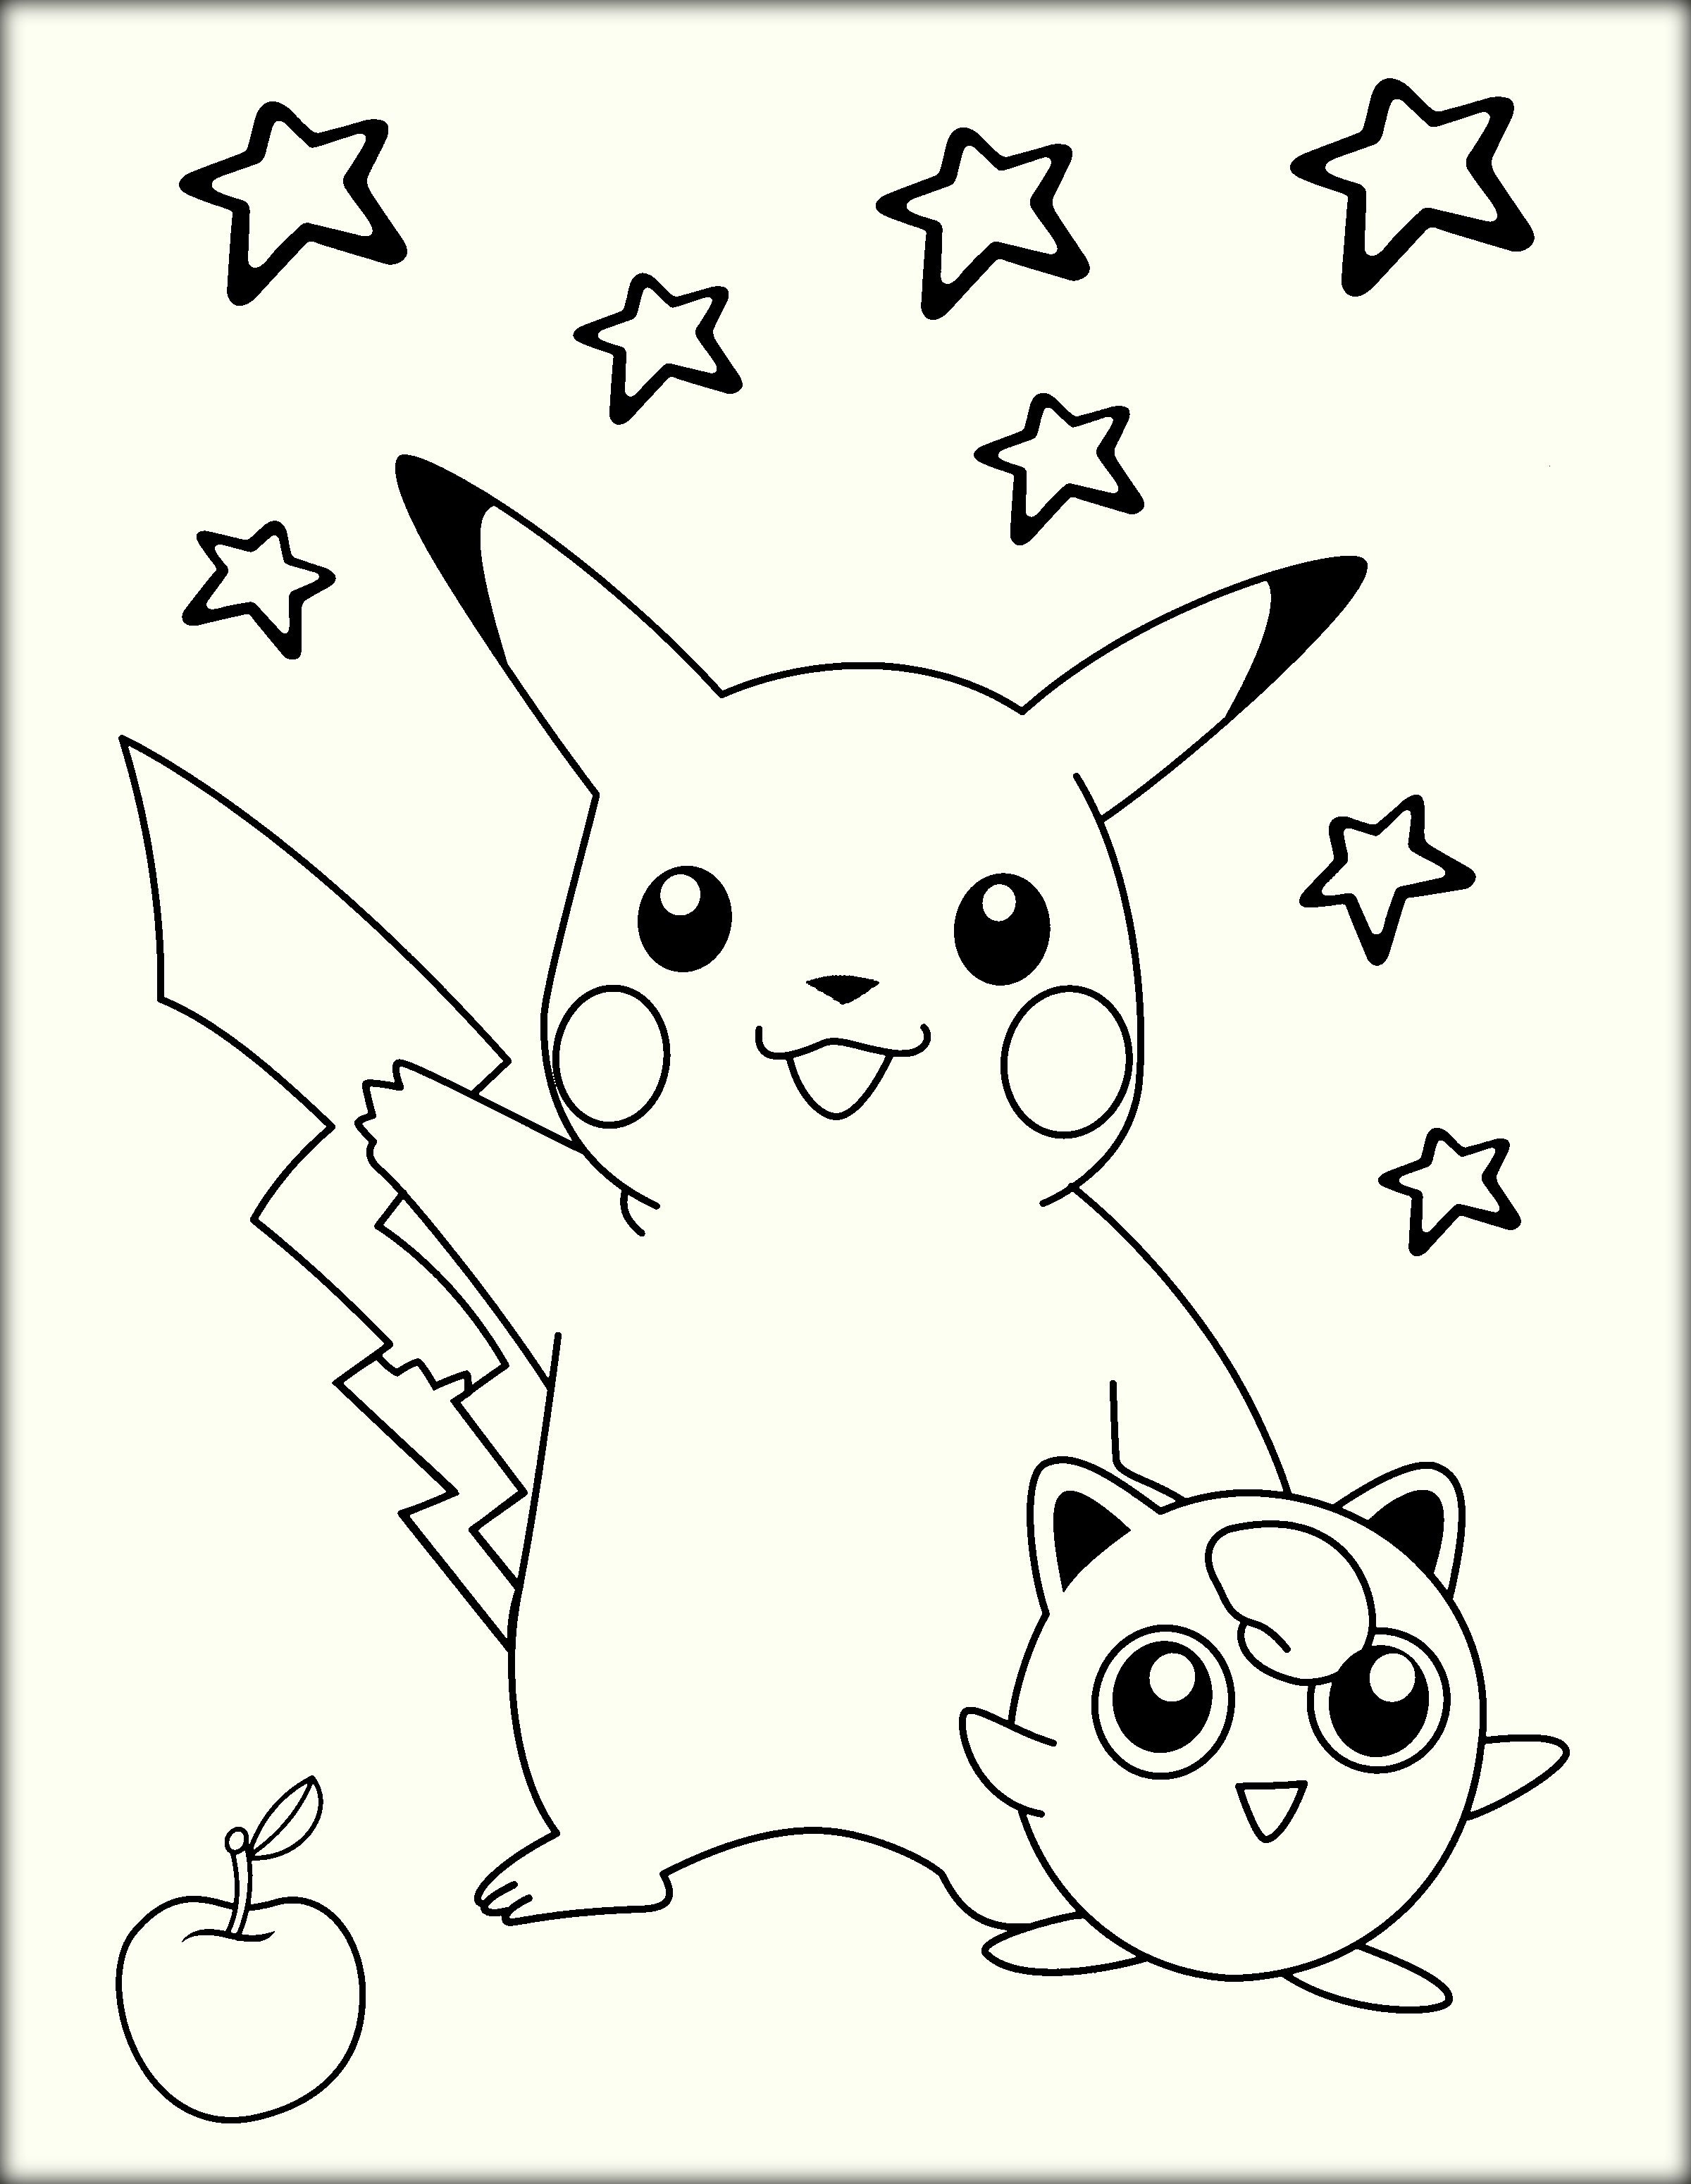 Free Printable Pokemon Coloring Pages 23 Pokemon Printable Coloring - Free Printable Pokemon Coloring Pages